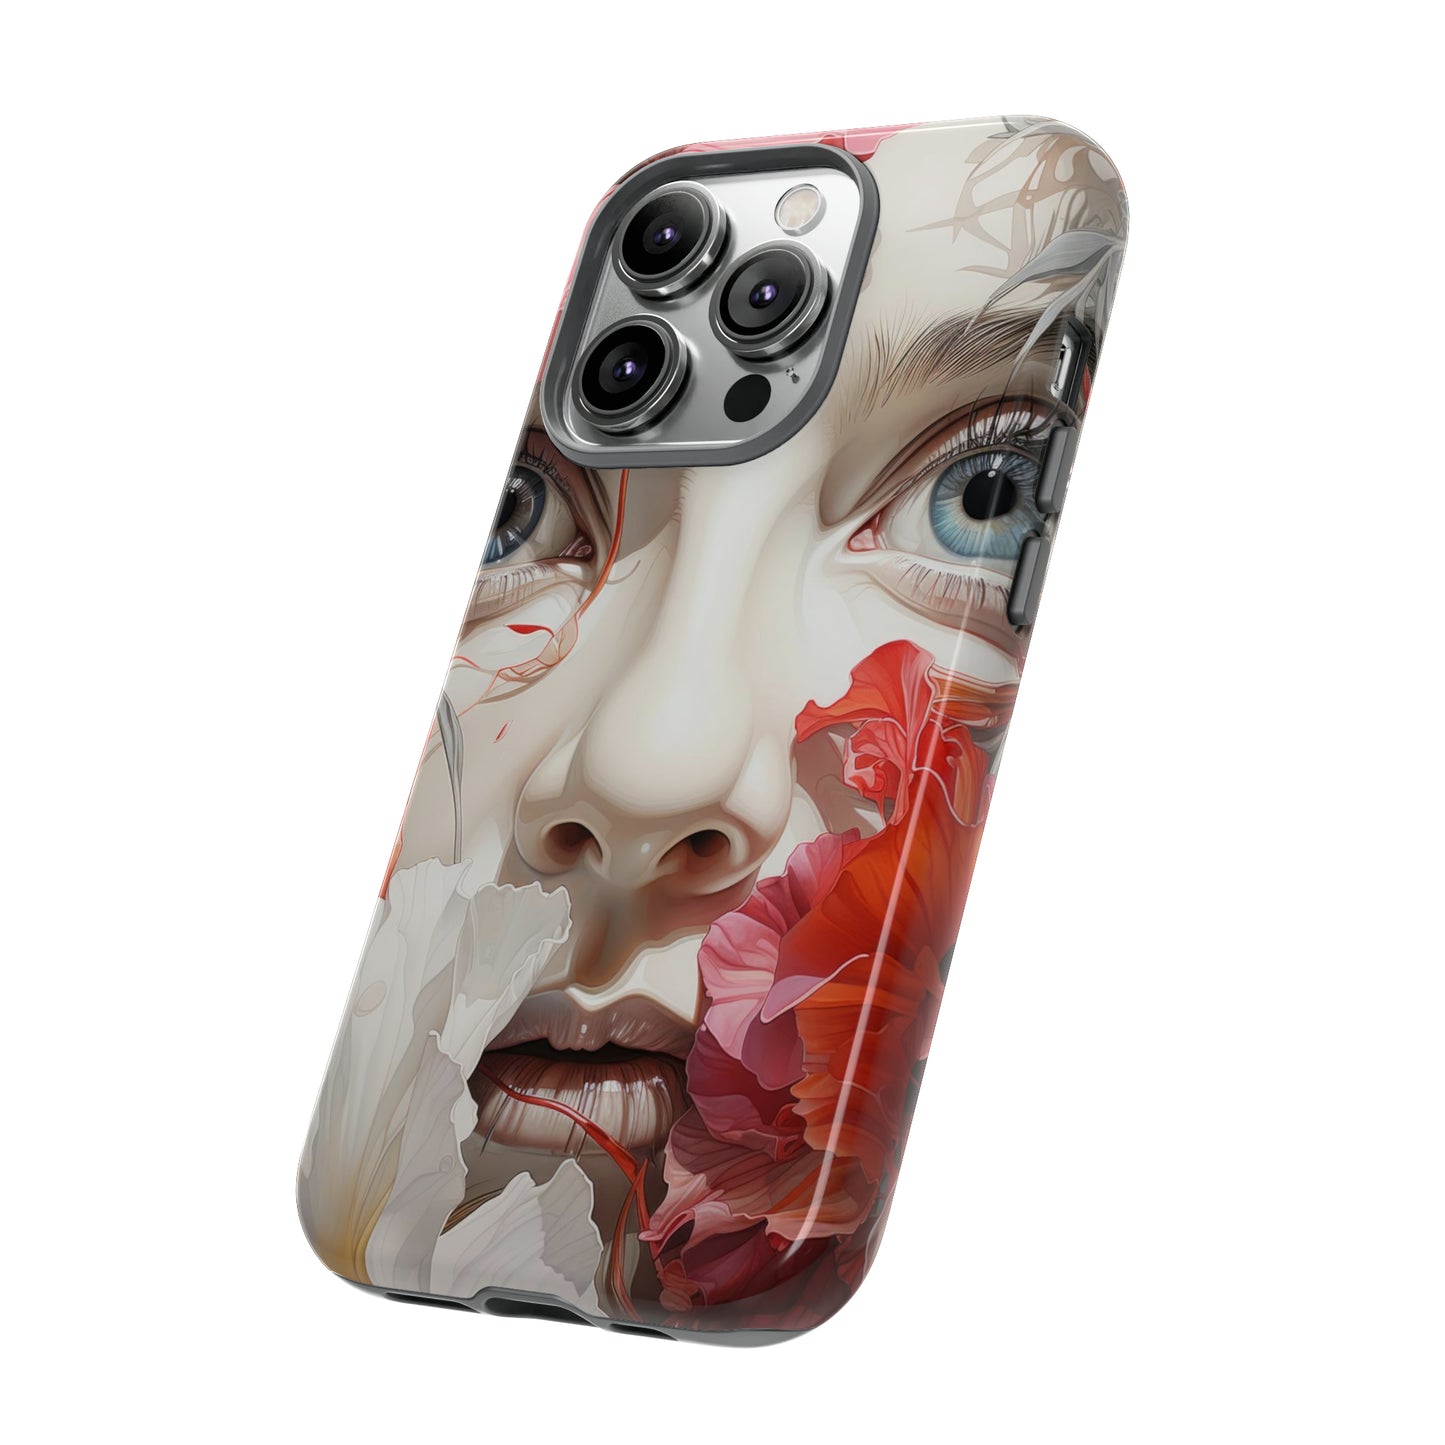 Pale-Faced Woman Floral Escape Protective Phone Case - Vibrant Artistry for iPhone, Samsung, Pixel